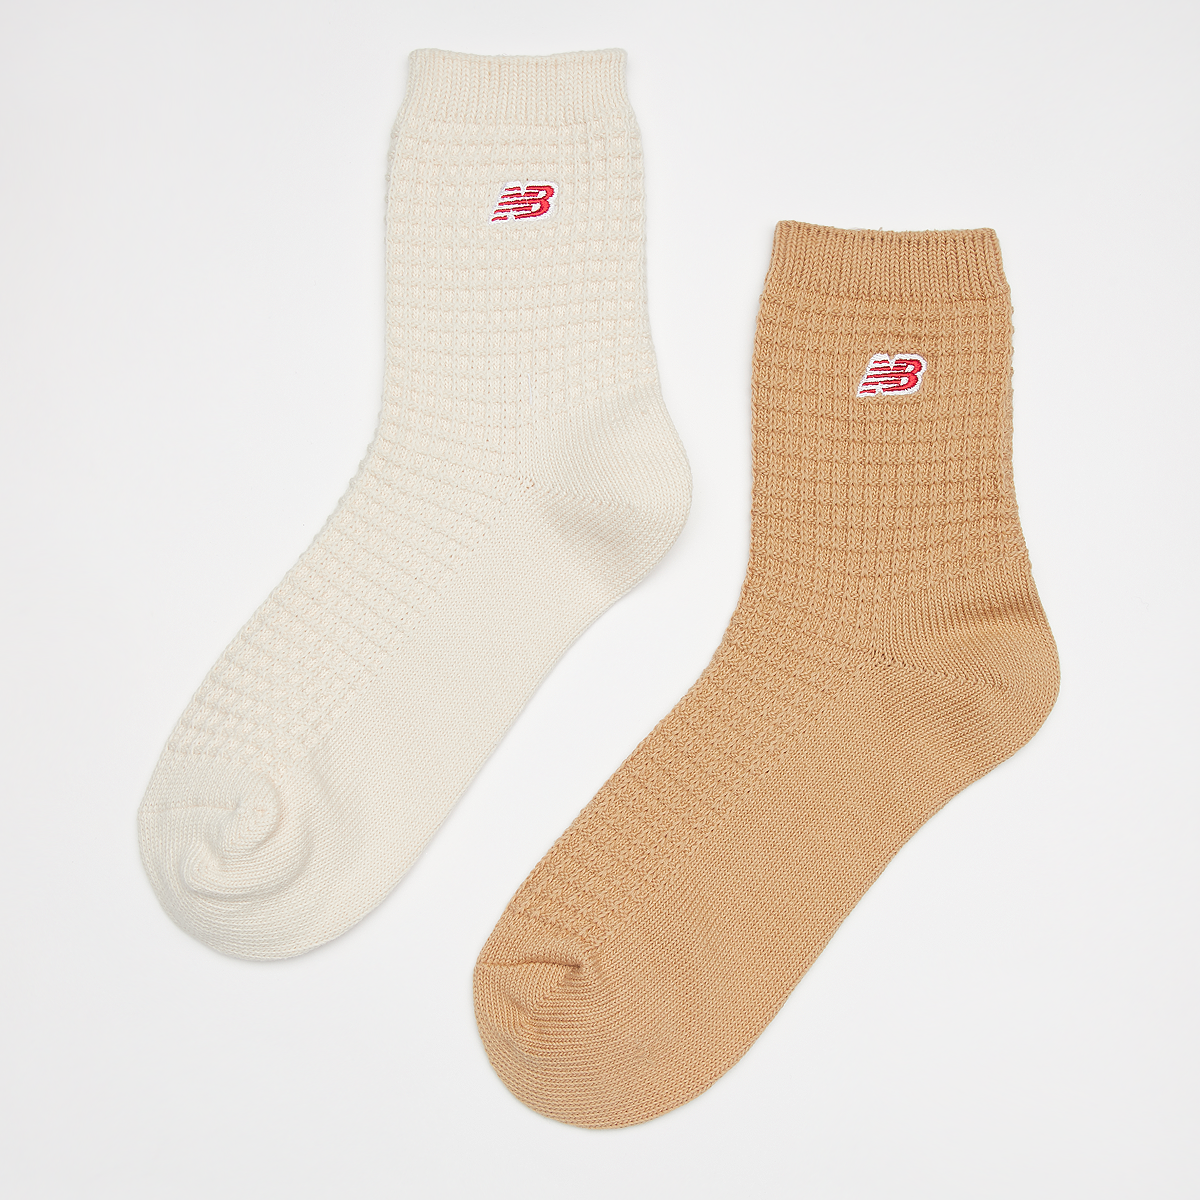 Waffle Knit Ankle Socks (2 Pack), New Balance, Accessoires, beige, brown, taille: 43-46